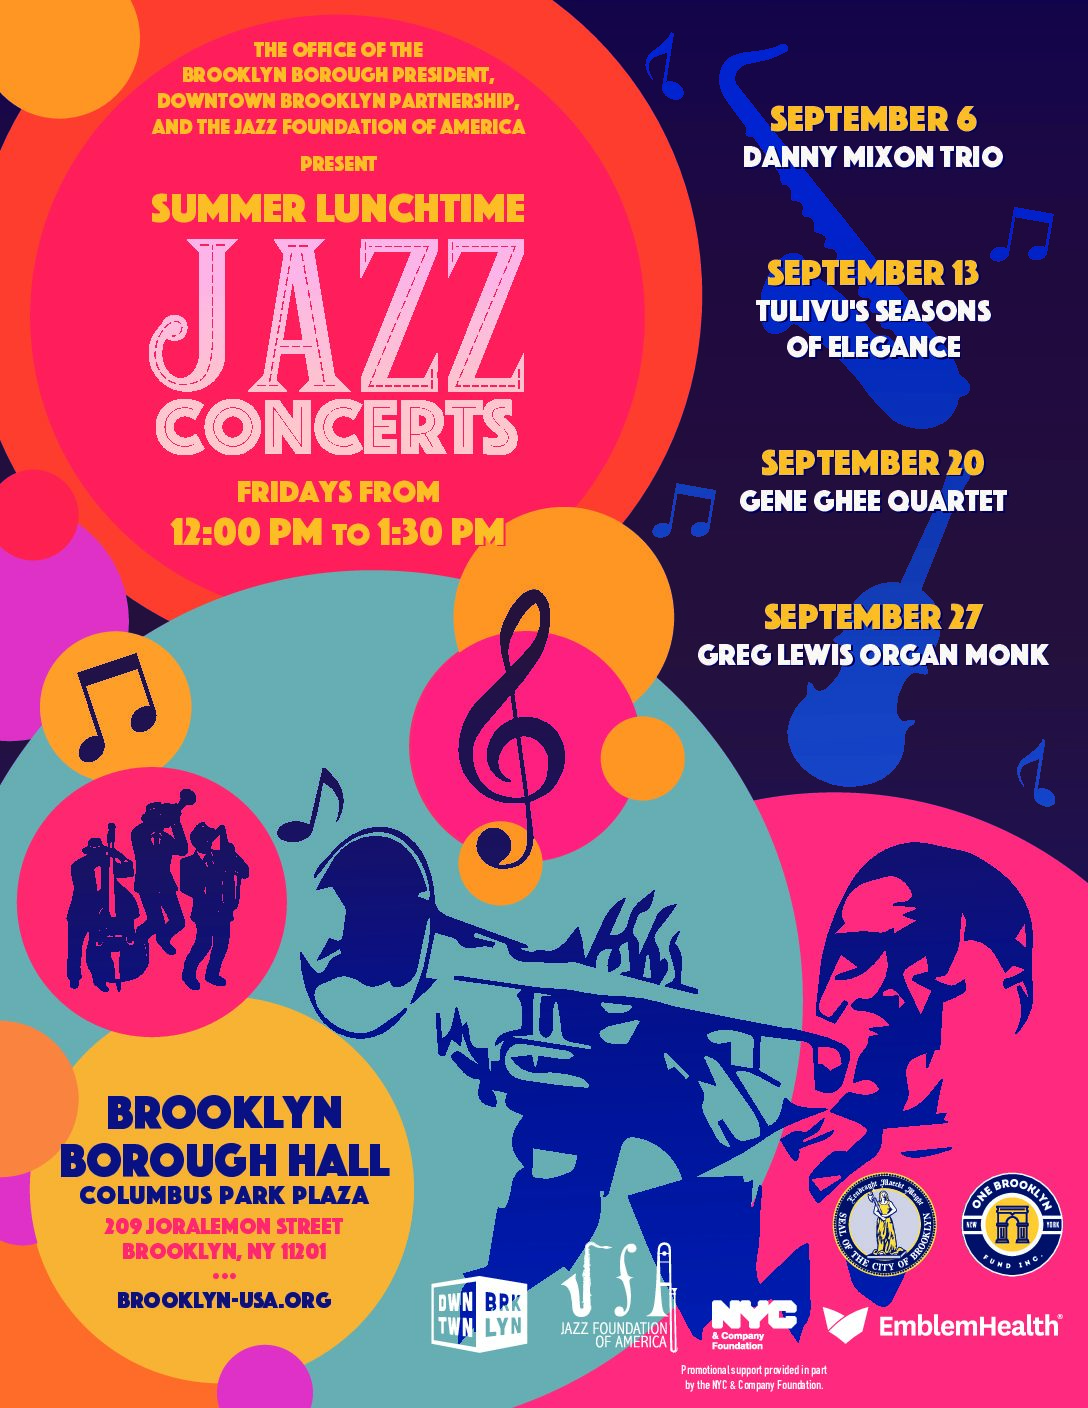 Summer Lunchtime Concert Series Brooklyn Borough Hall Jazz